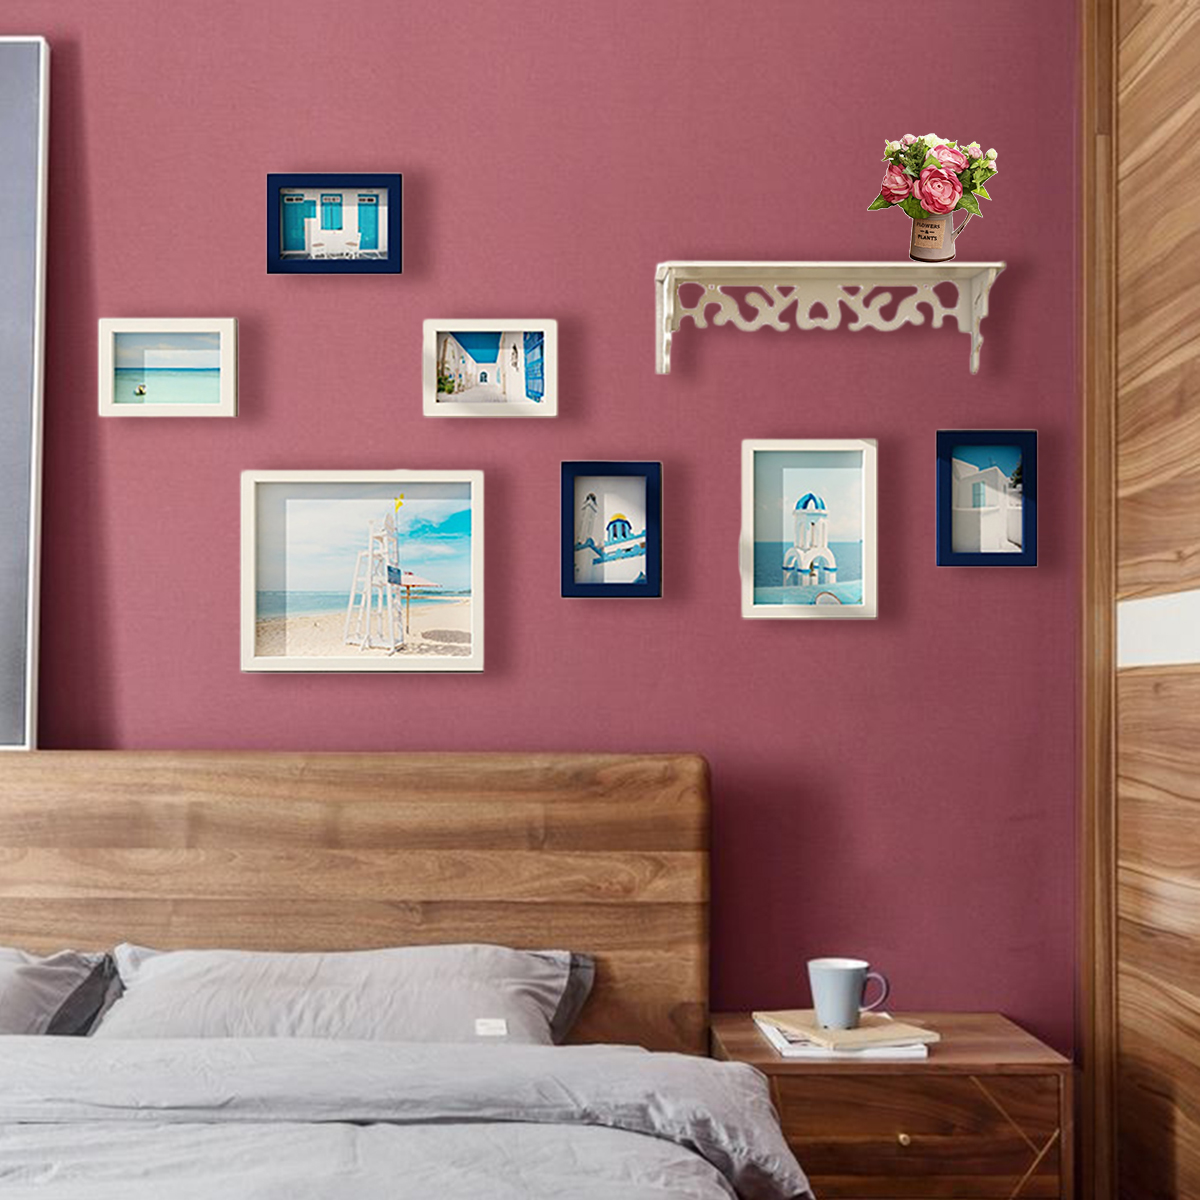 7-Pcsset-Photo-Frames-5710-inch-Wall-Hanging-Family-Memory-Art-Picture-Photo-Home-Office-Hotel-Decor-1769826-10